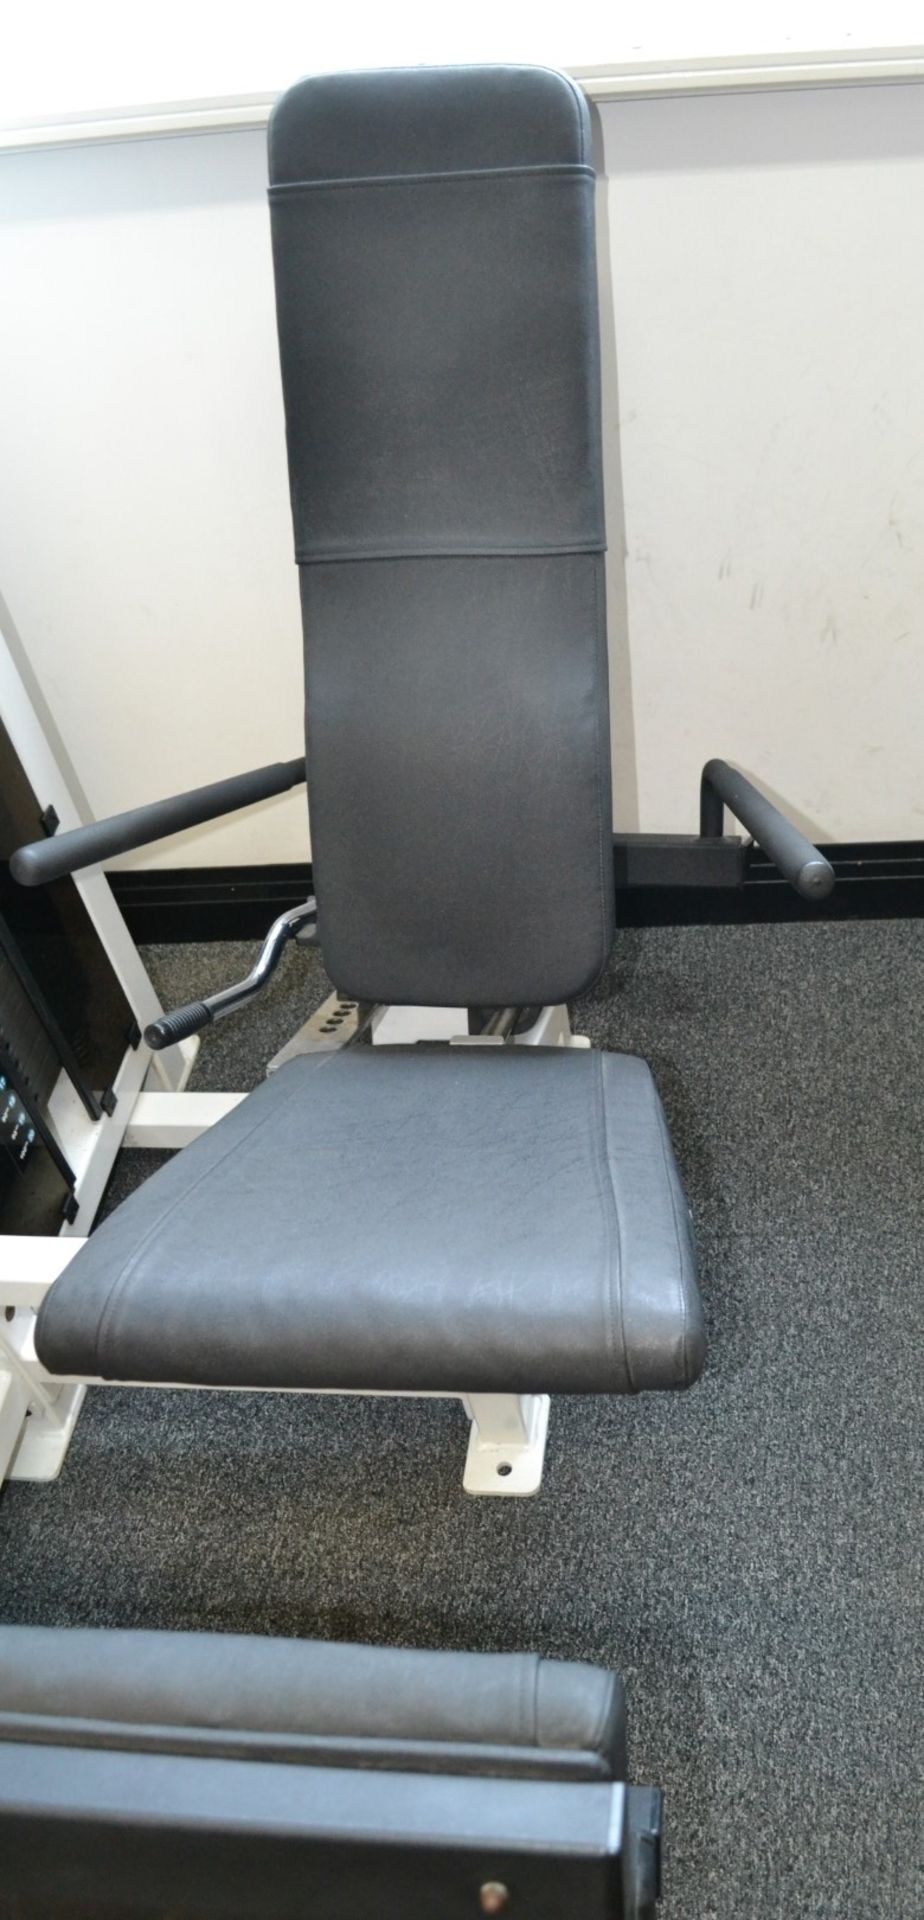 1 x Force Seated Leg Curl Pin Loaded Gym Machine With 100kg Weights - Ref: J2027 - Image 4 of 4